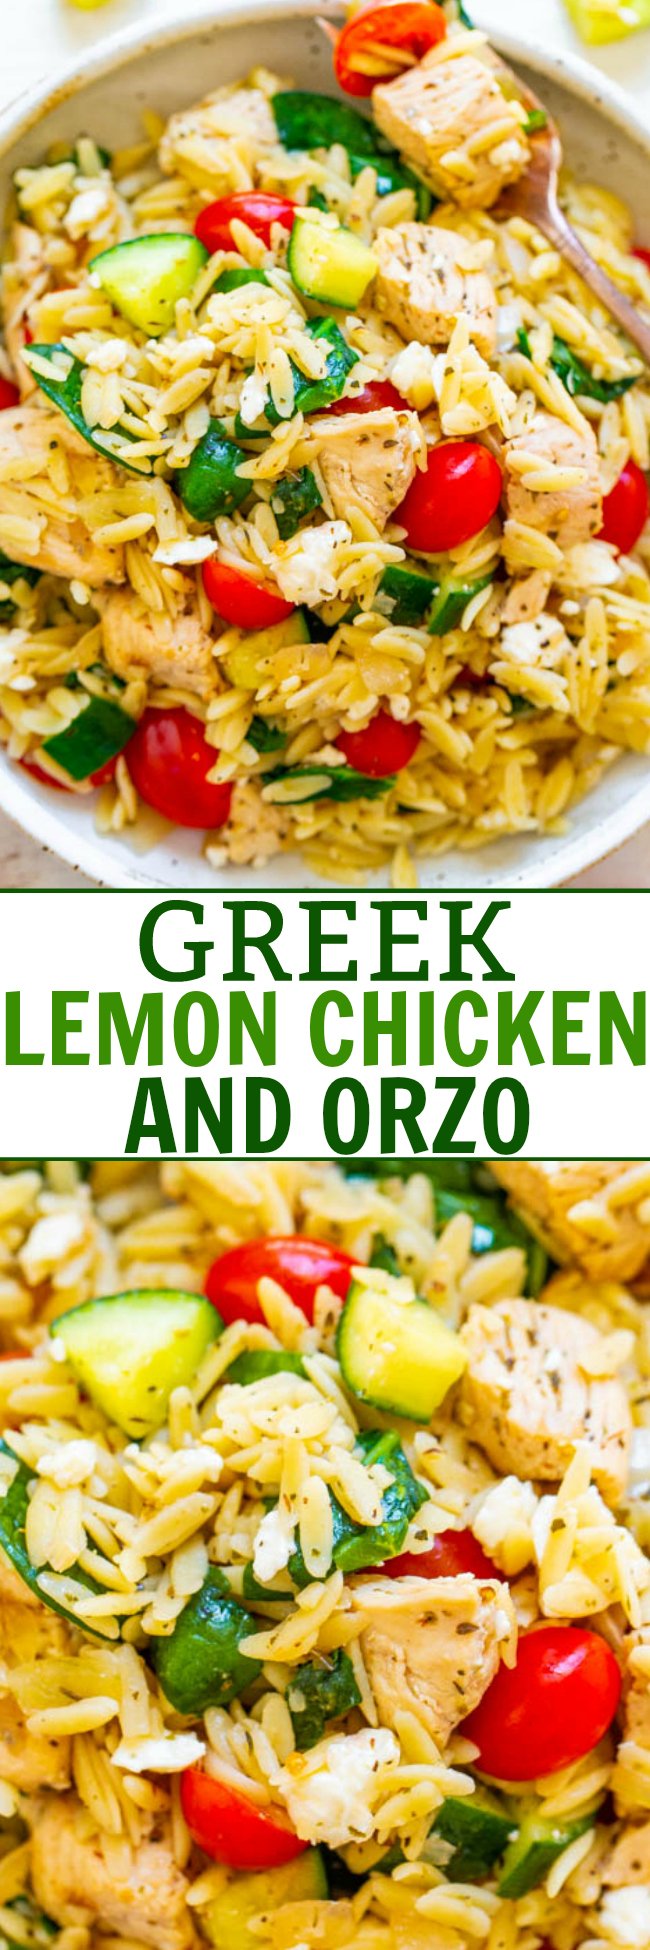 Greek Lemon Chicken and Orzo - EASY, ready in 25 minutes, and feeds a crowd!! Juicy lemon chicken with orzo, fresh spinach, cucumbers, and tomatoes make this a dinnertime WINNER! Great for parties, picnics, and potlucks!!